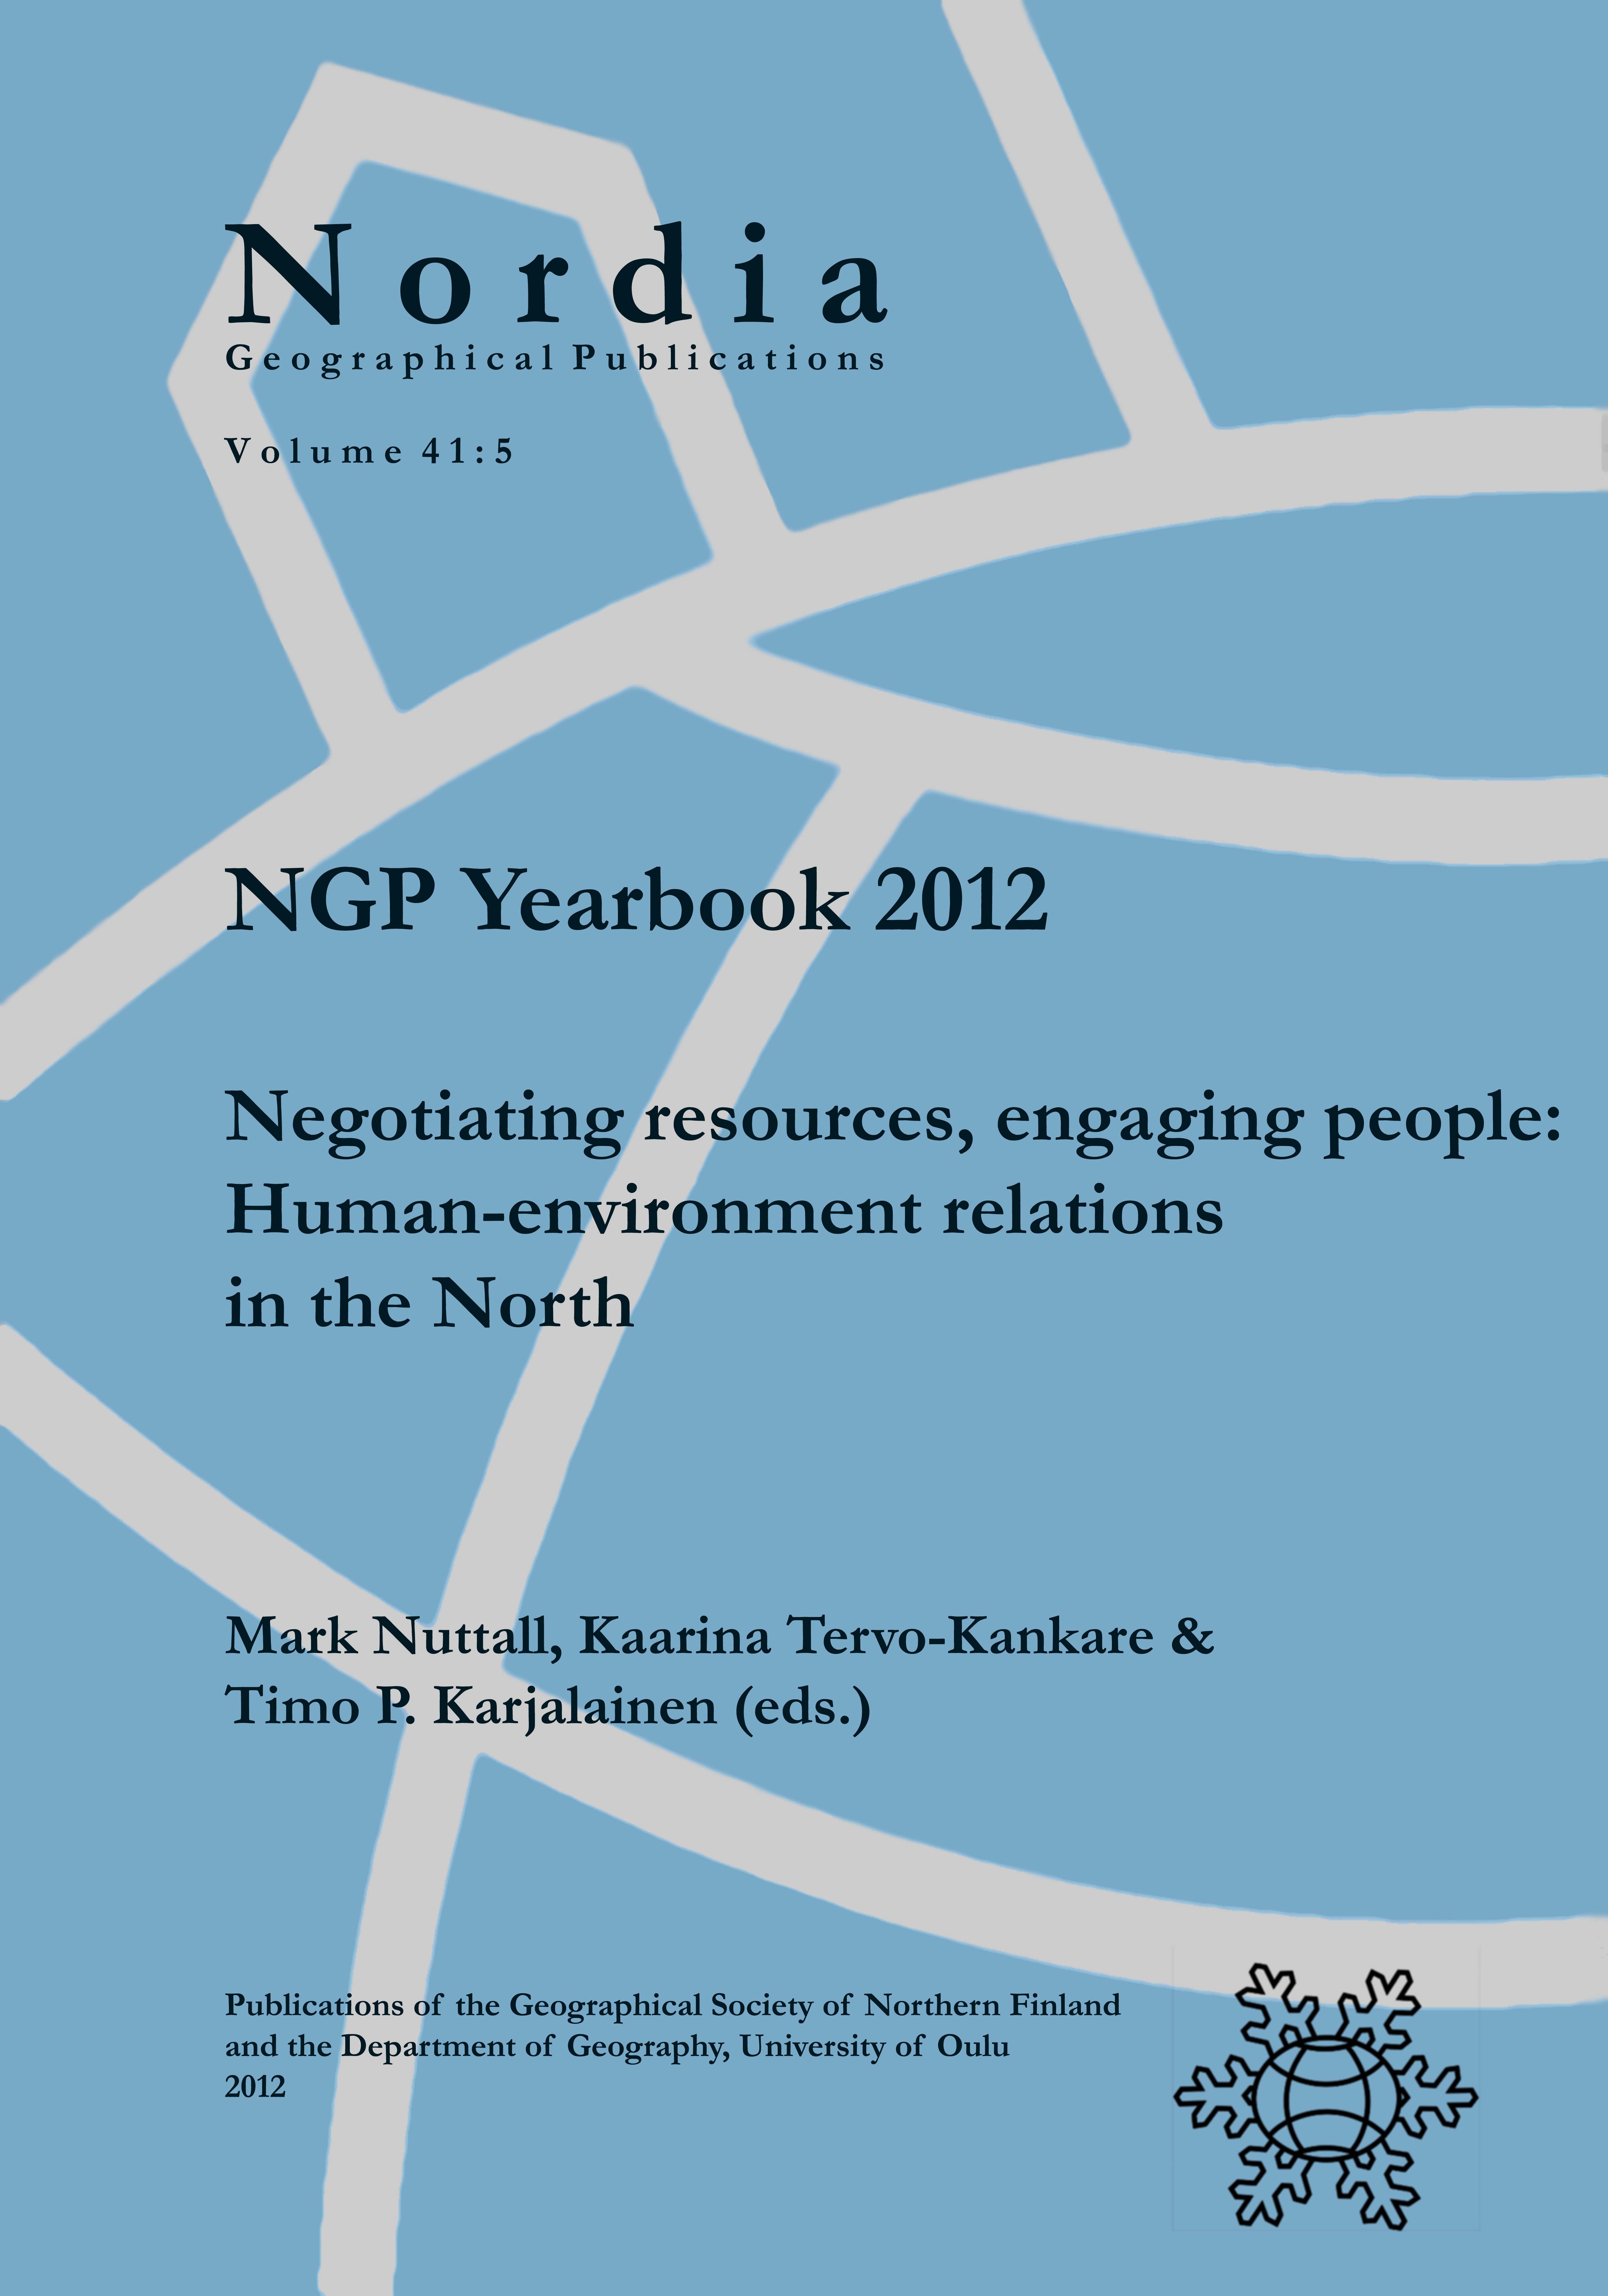 					View Vol. 41 No. 5: NGP Yearbook 2012: Negotiating resources, engaging people: Human-environment relations in the North
				